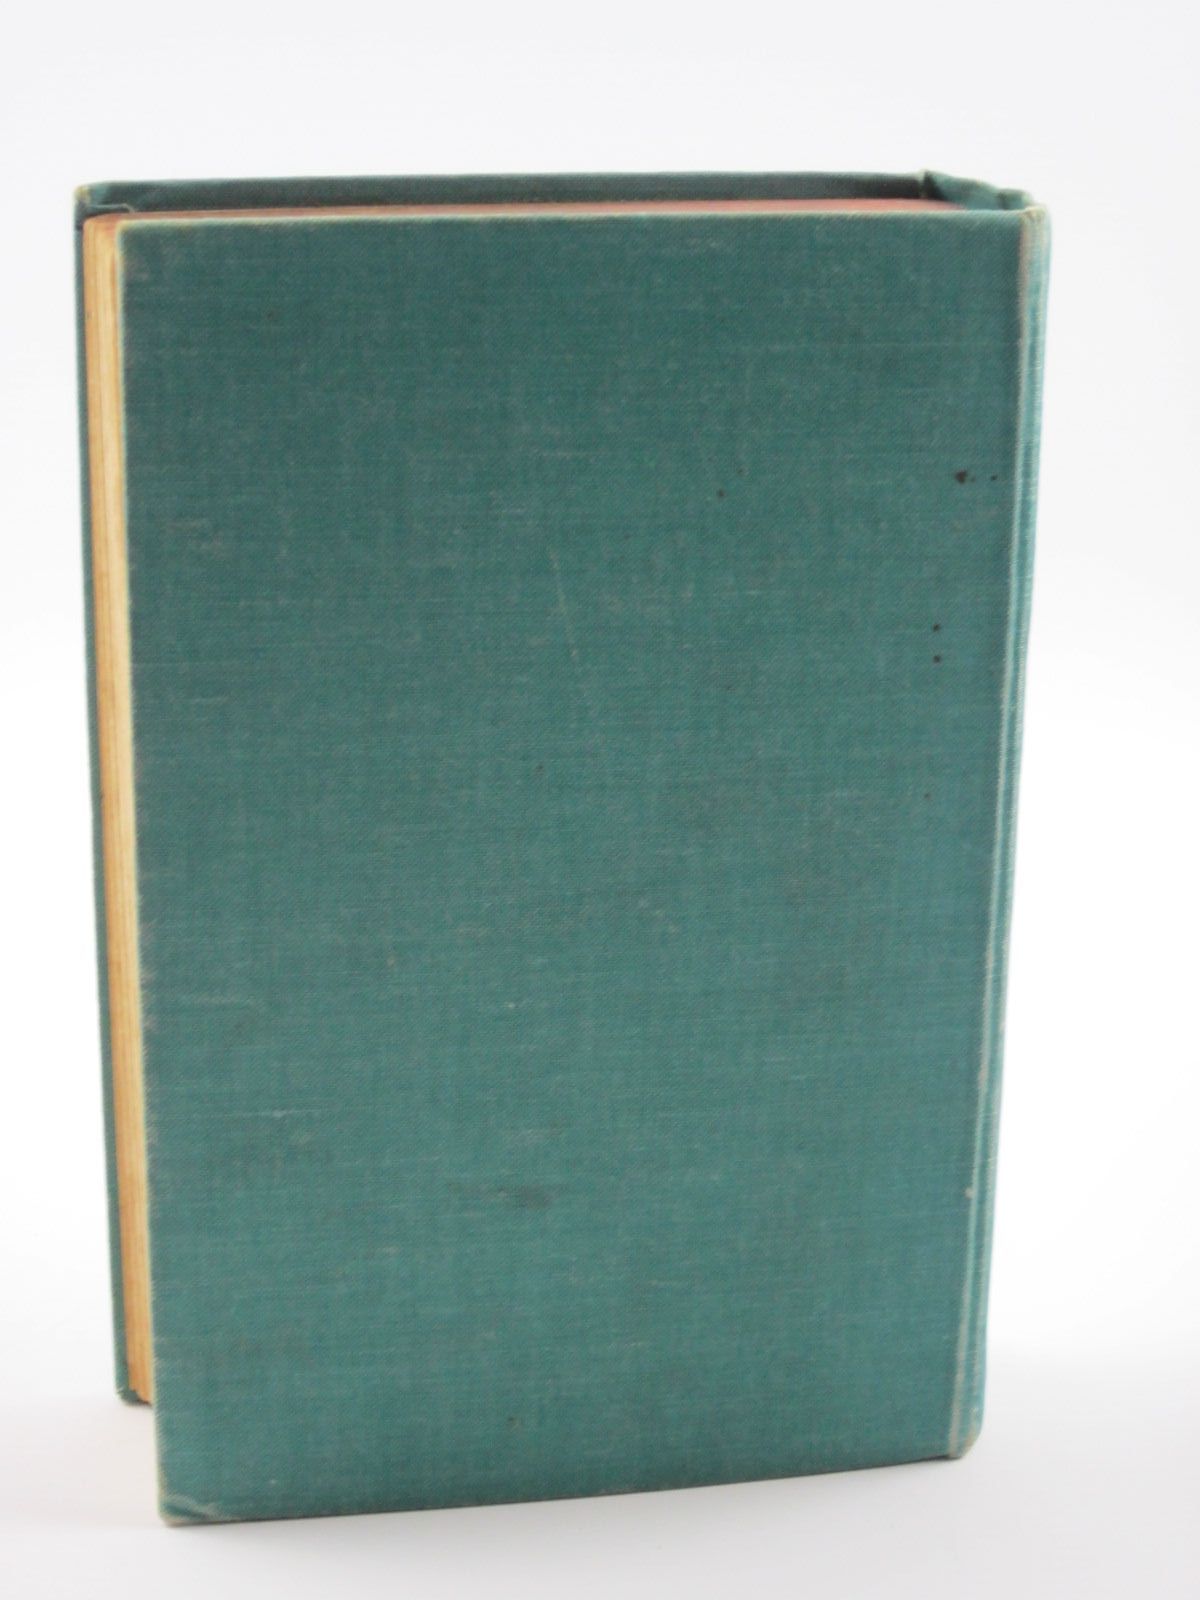 Photo of THE FAR ISLAND written by Pardoe, M. illustrated by Turvey, R. published by George Routledge & Sons Ltd. (STOCK CODE: 1309281)  for sale by Stella & Rose's Books